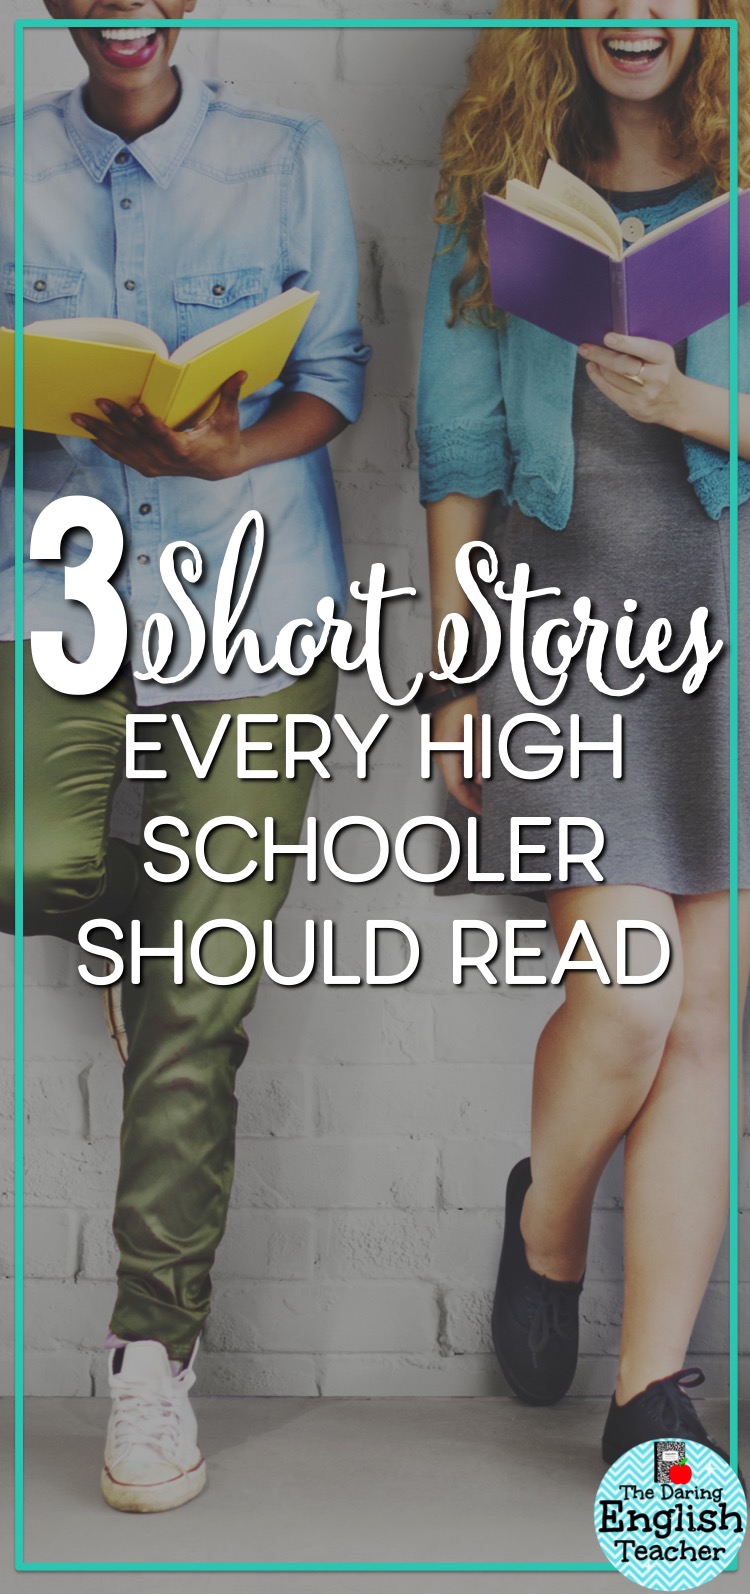 3 short stories every high school student should read